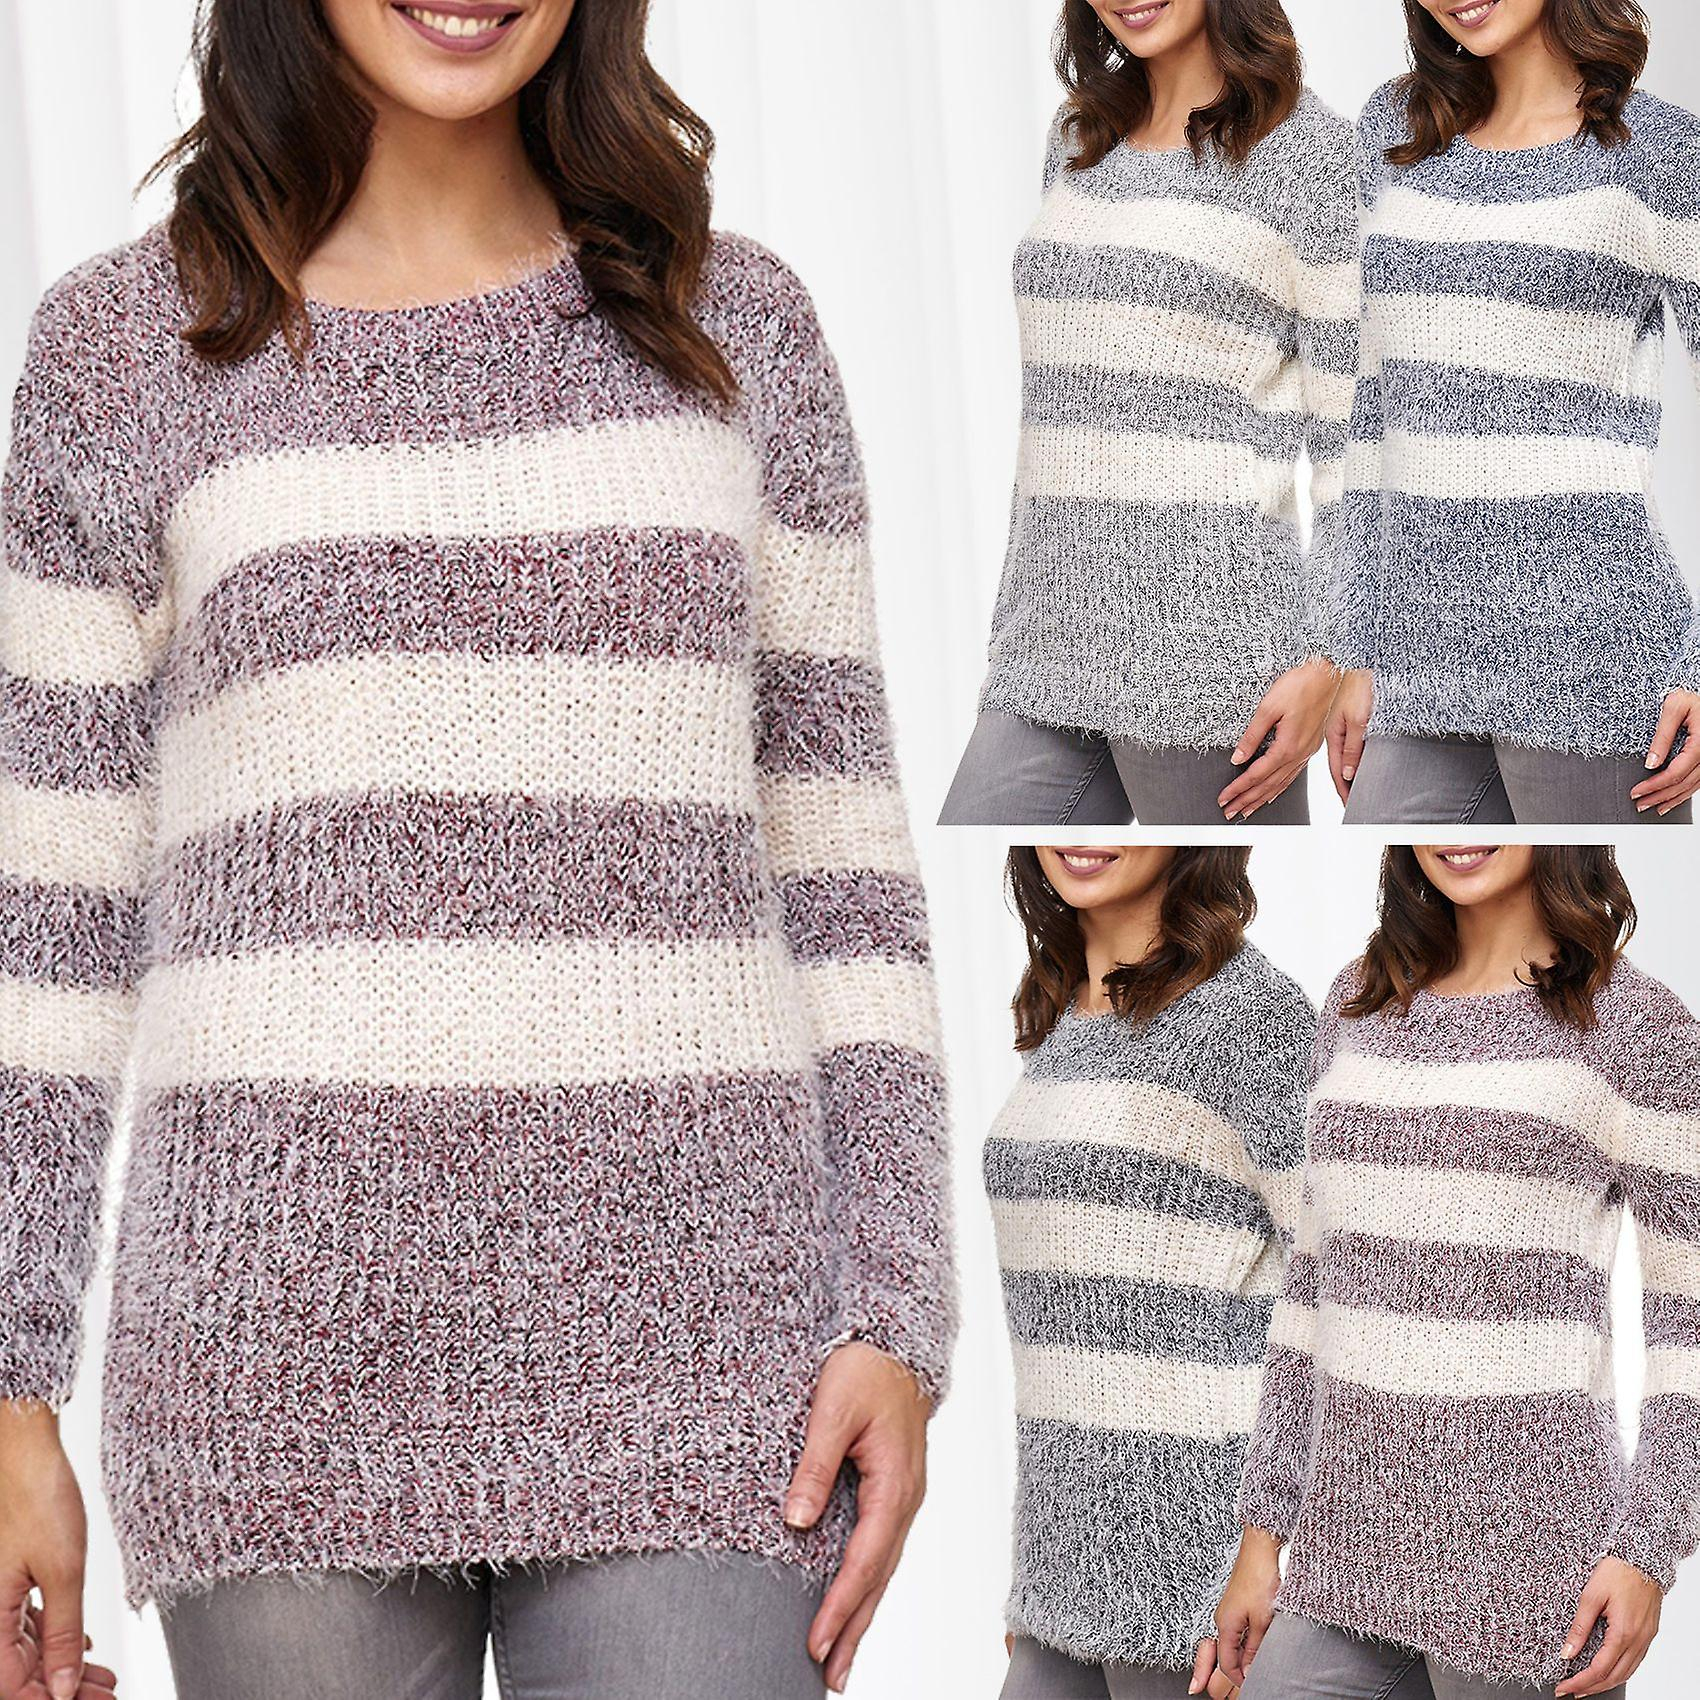 Knitted Pullover Sweater Patterns Womens Knit Pullover Sweat Shirt Sweater Longsleeve Cozy Winter Stripes Pattern